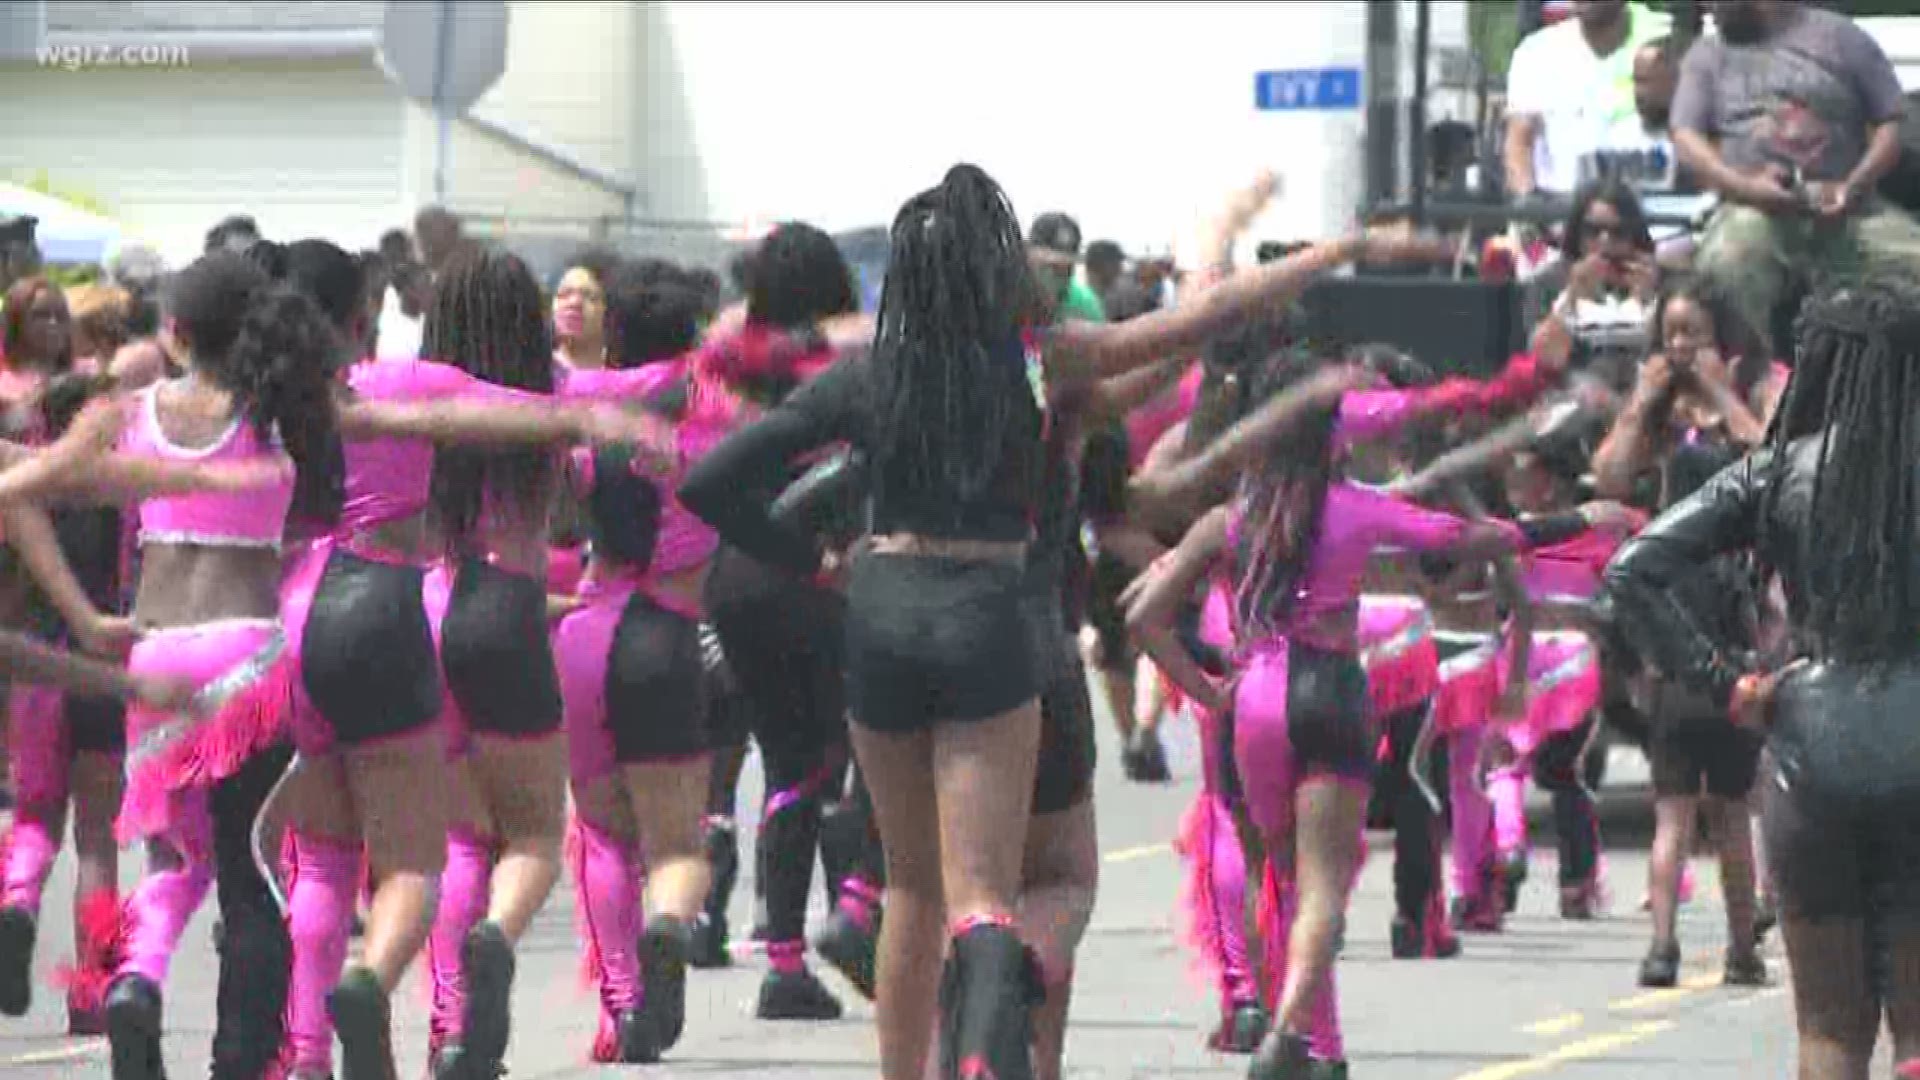 43rd annual Juneteenth parade in Buffalo